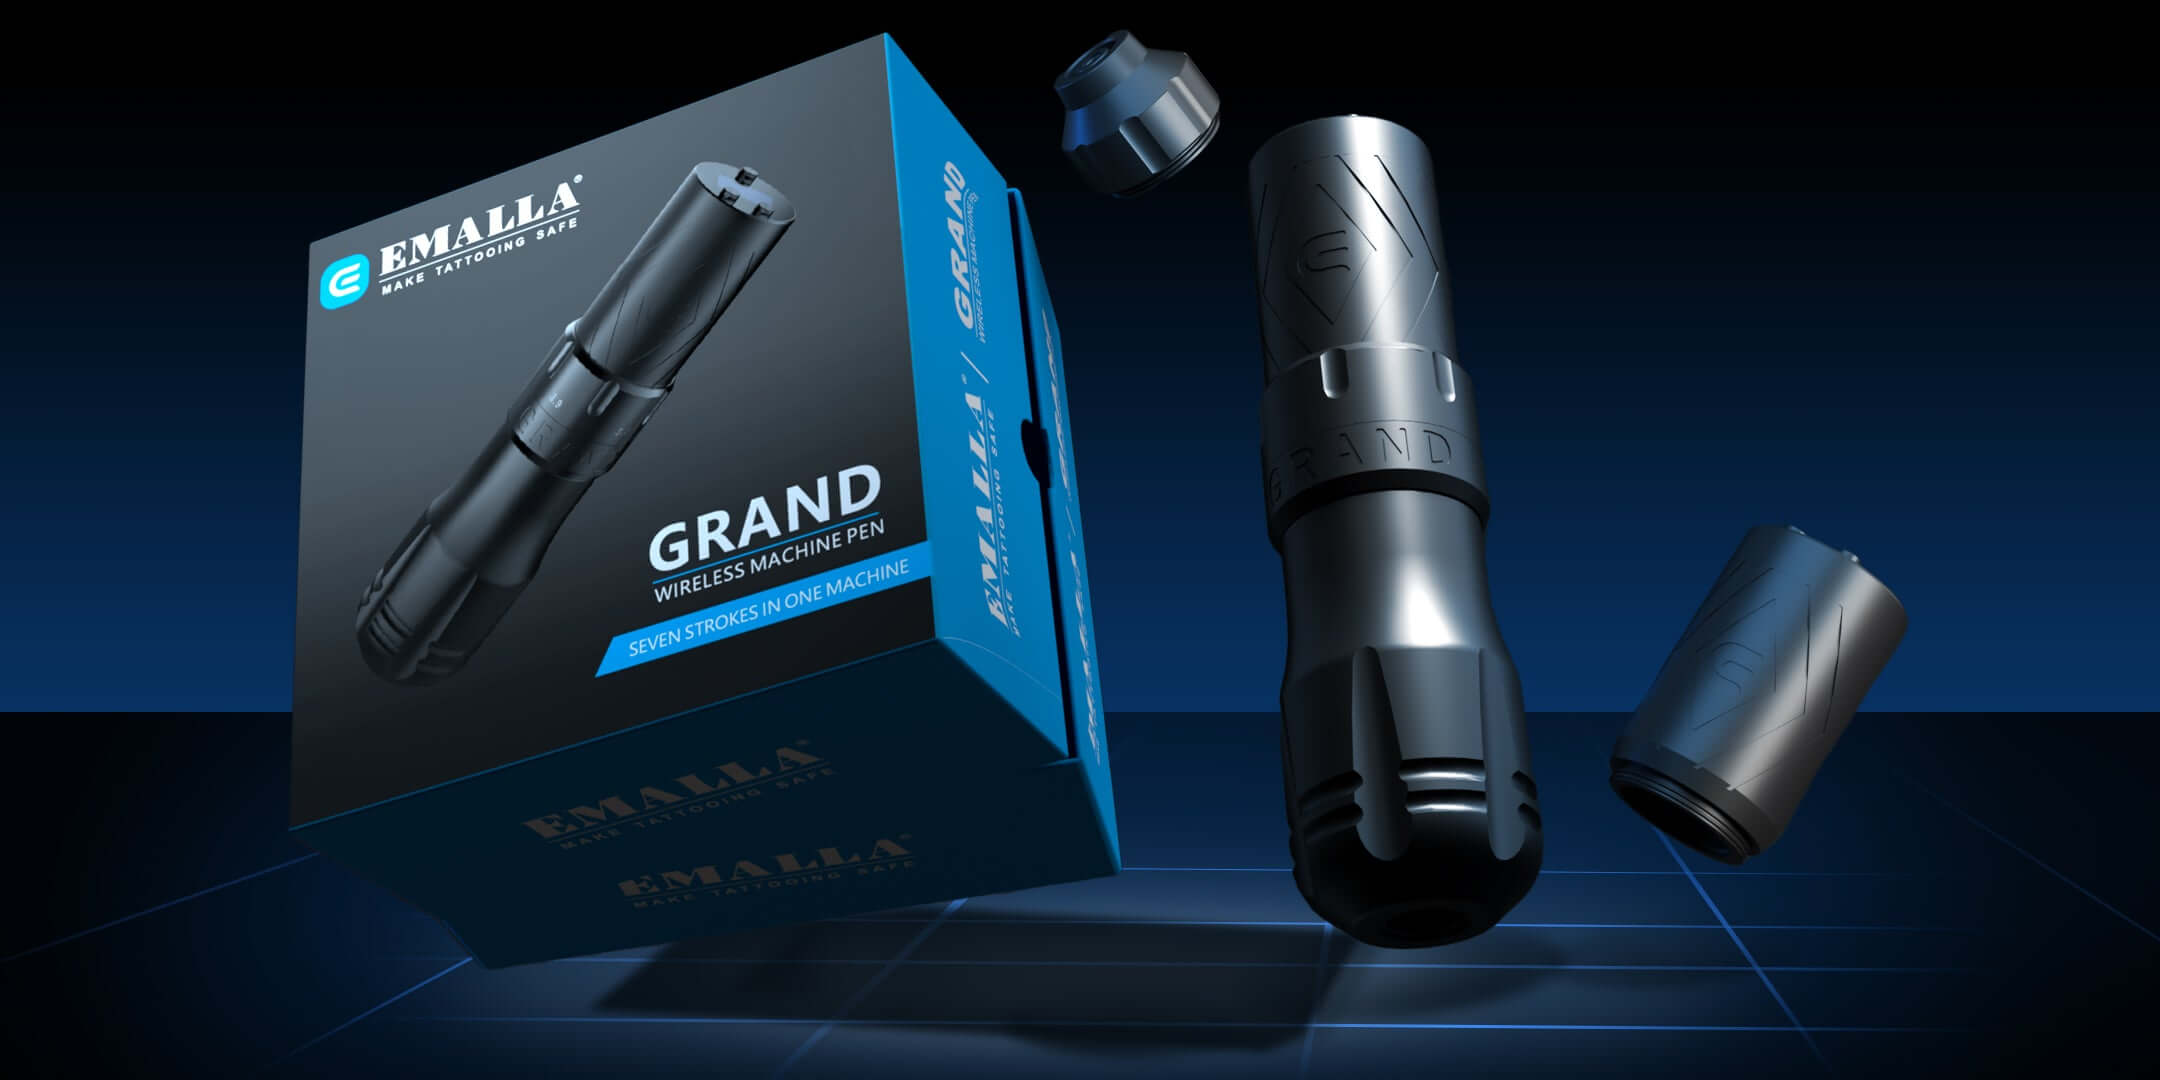 Package and component of EMALLA GRAND Wireless Tattoo Pen Machine